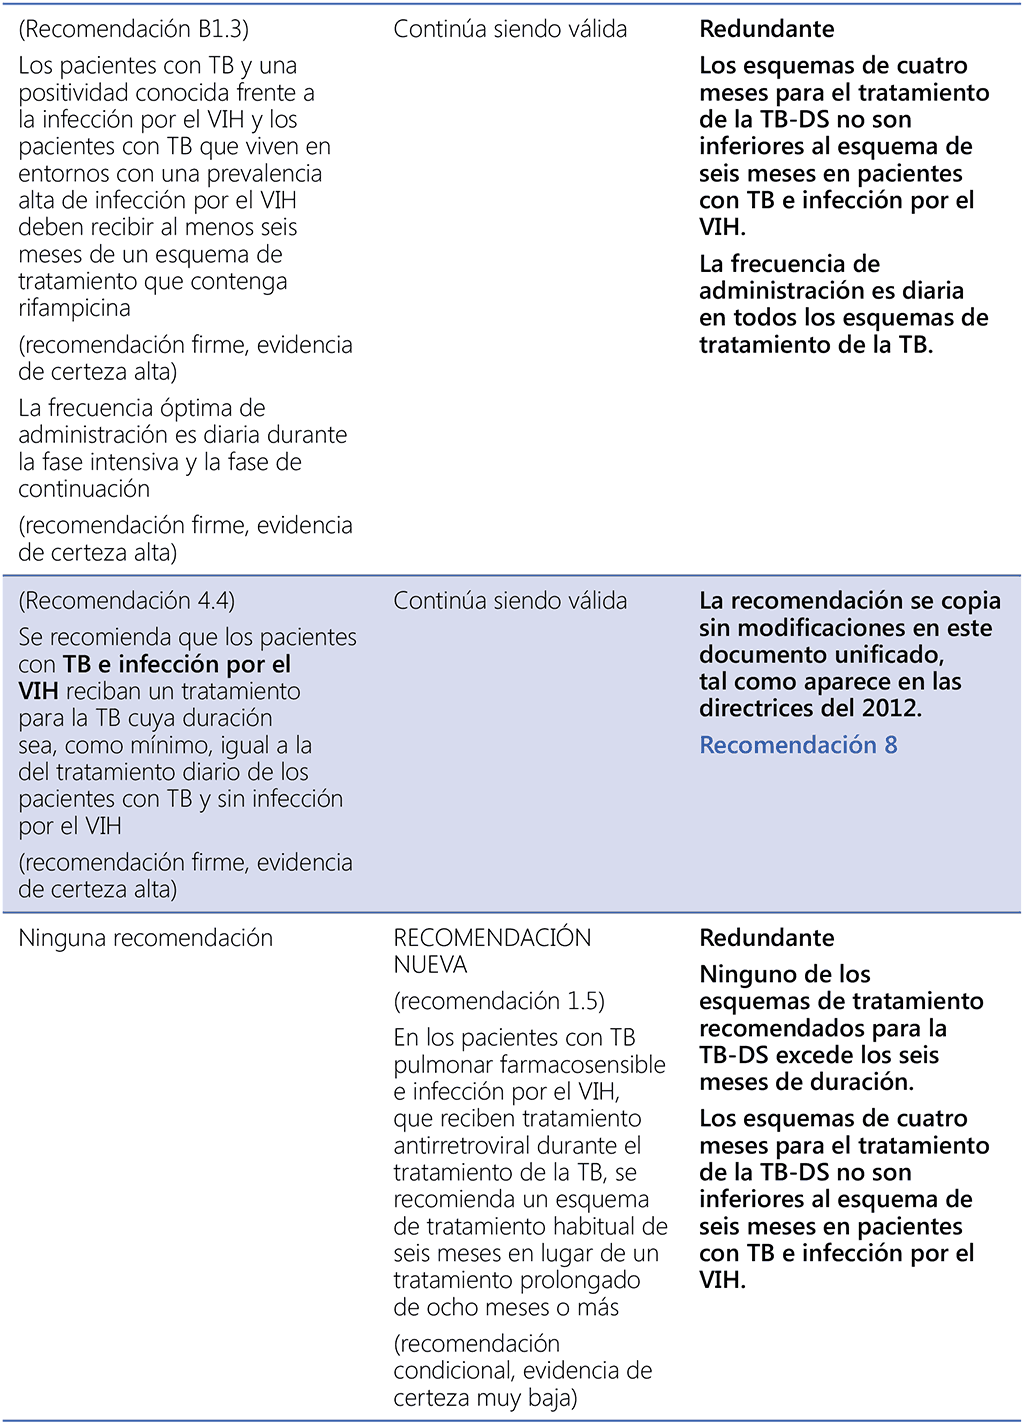 The use of adjuvant steroids in the treatment of TB meningitis and pericarditis